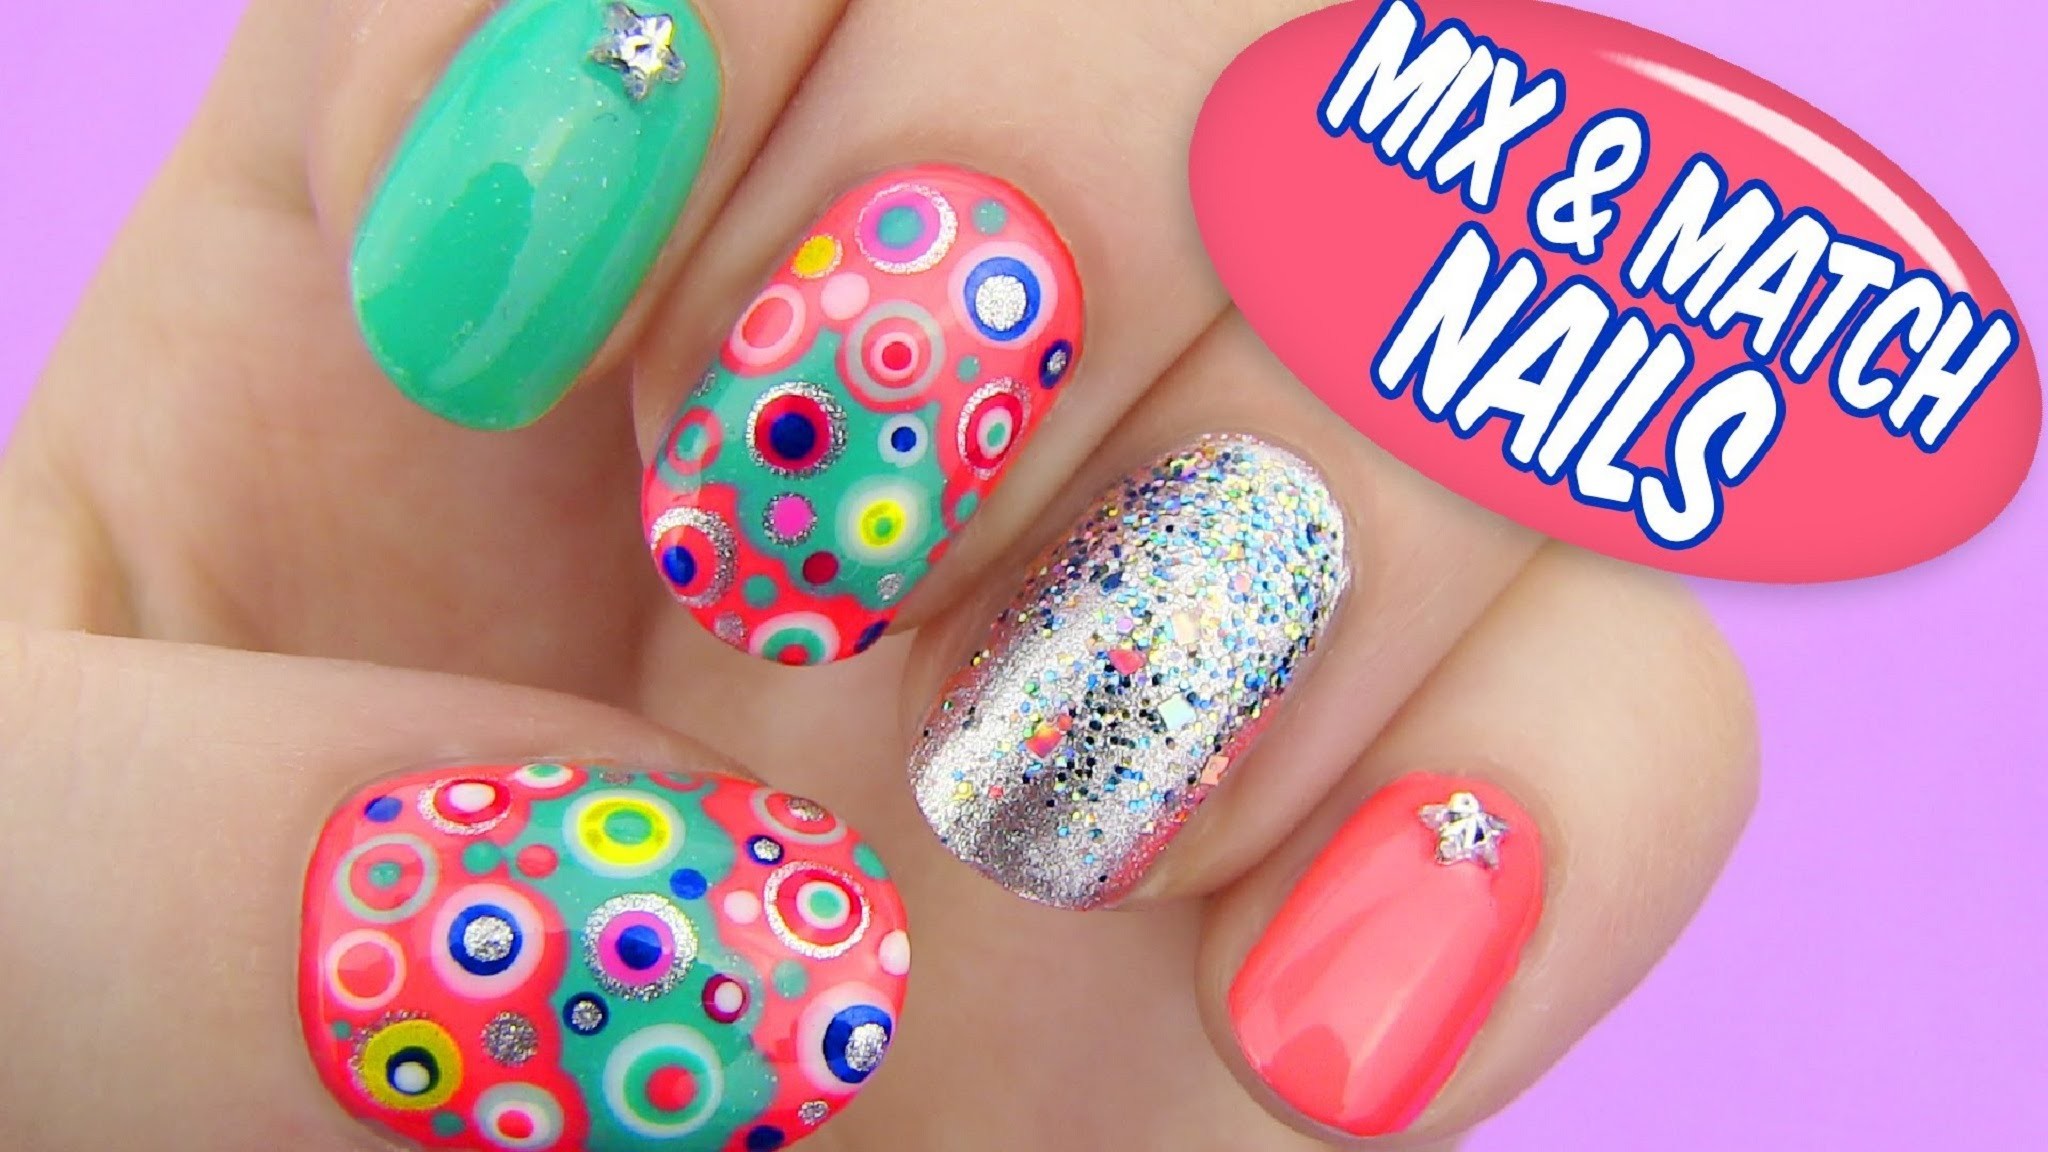 8. DIY Nail Art for Beginners - wide 7